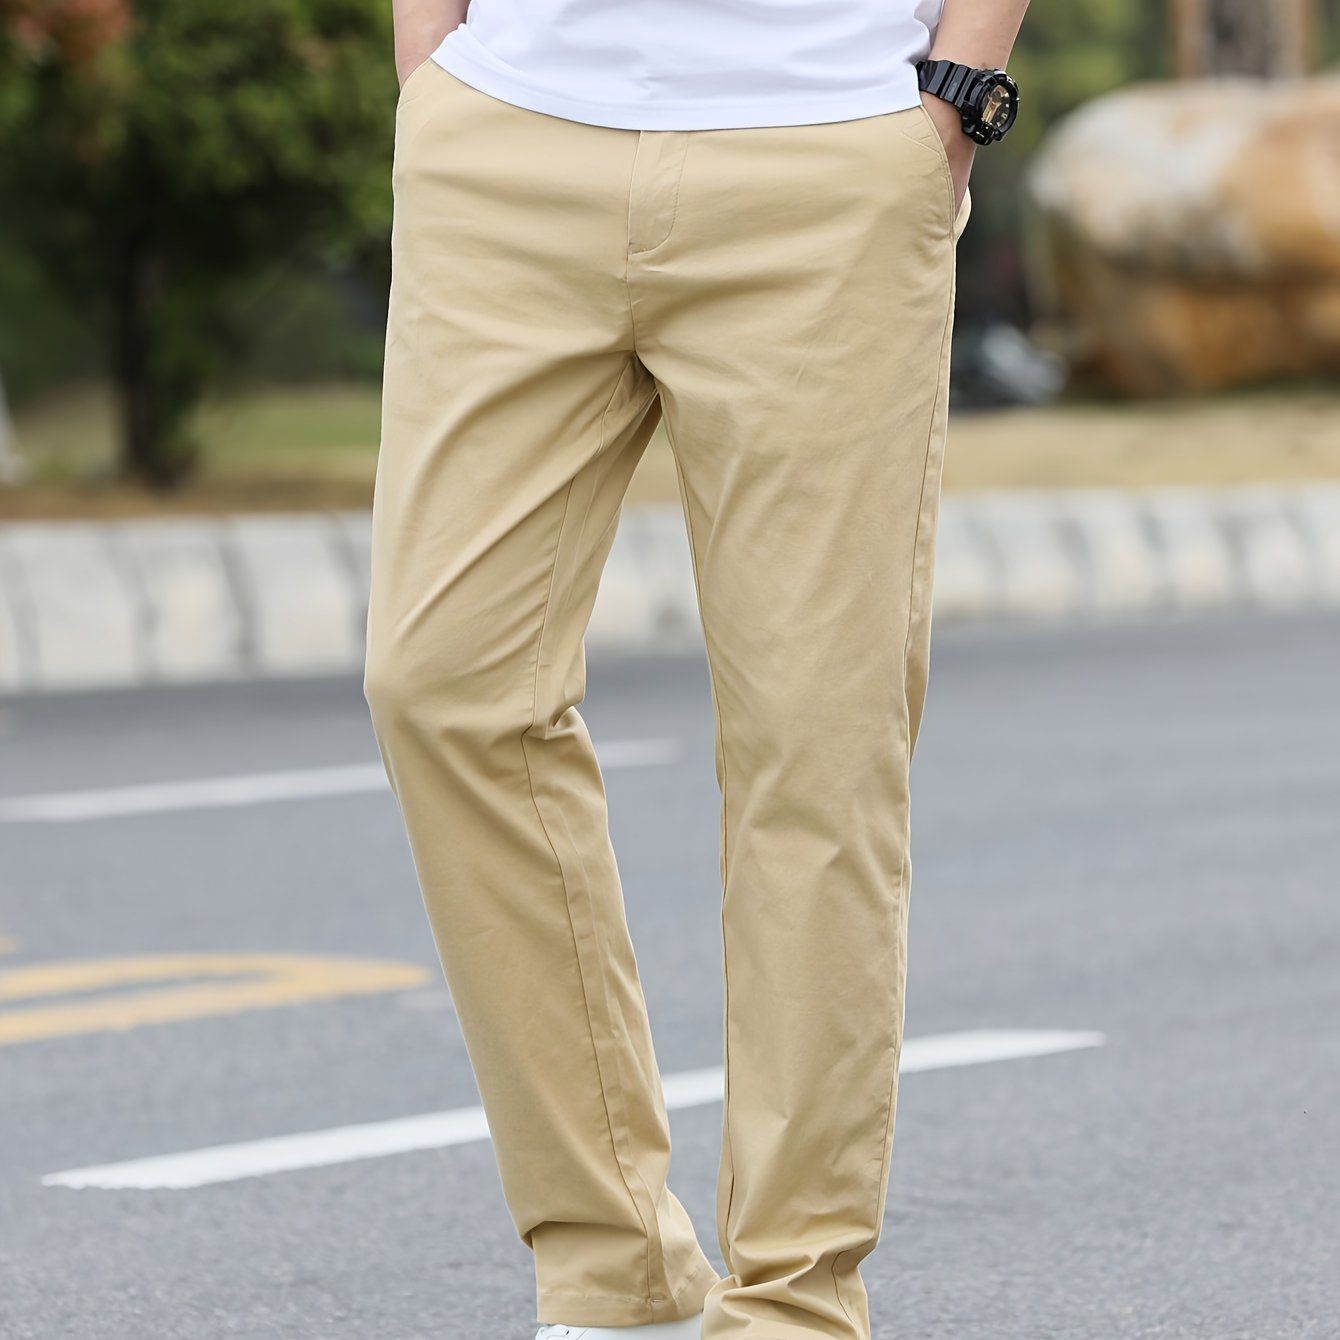 mens solid pants with pockets casual cotton trousers for outdoor activities gift